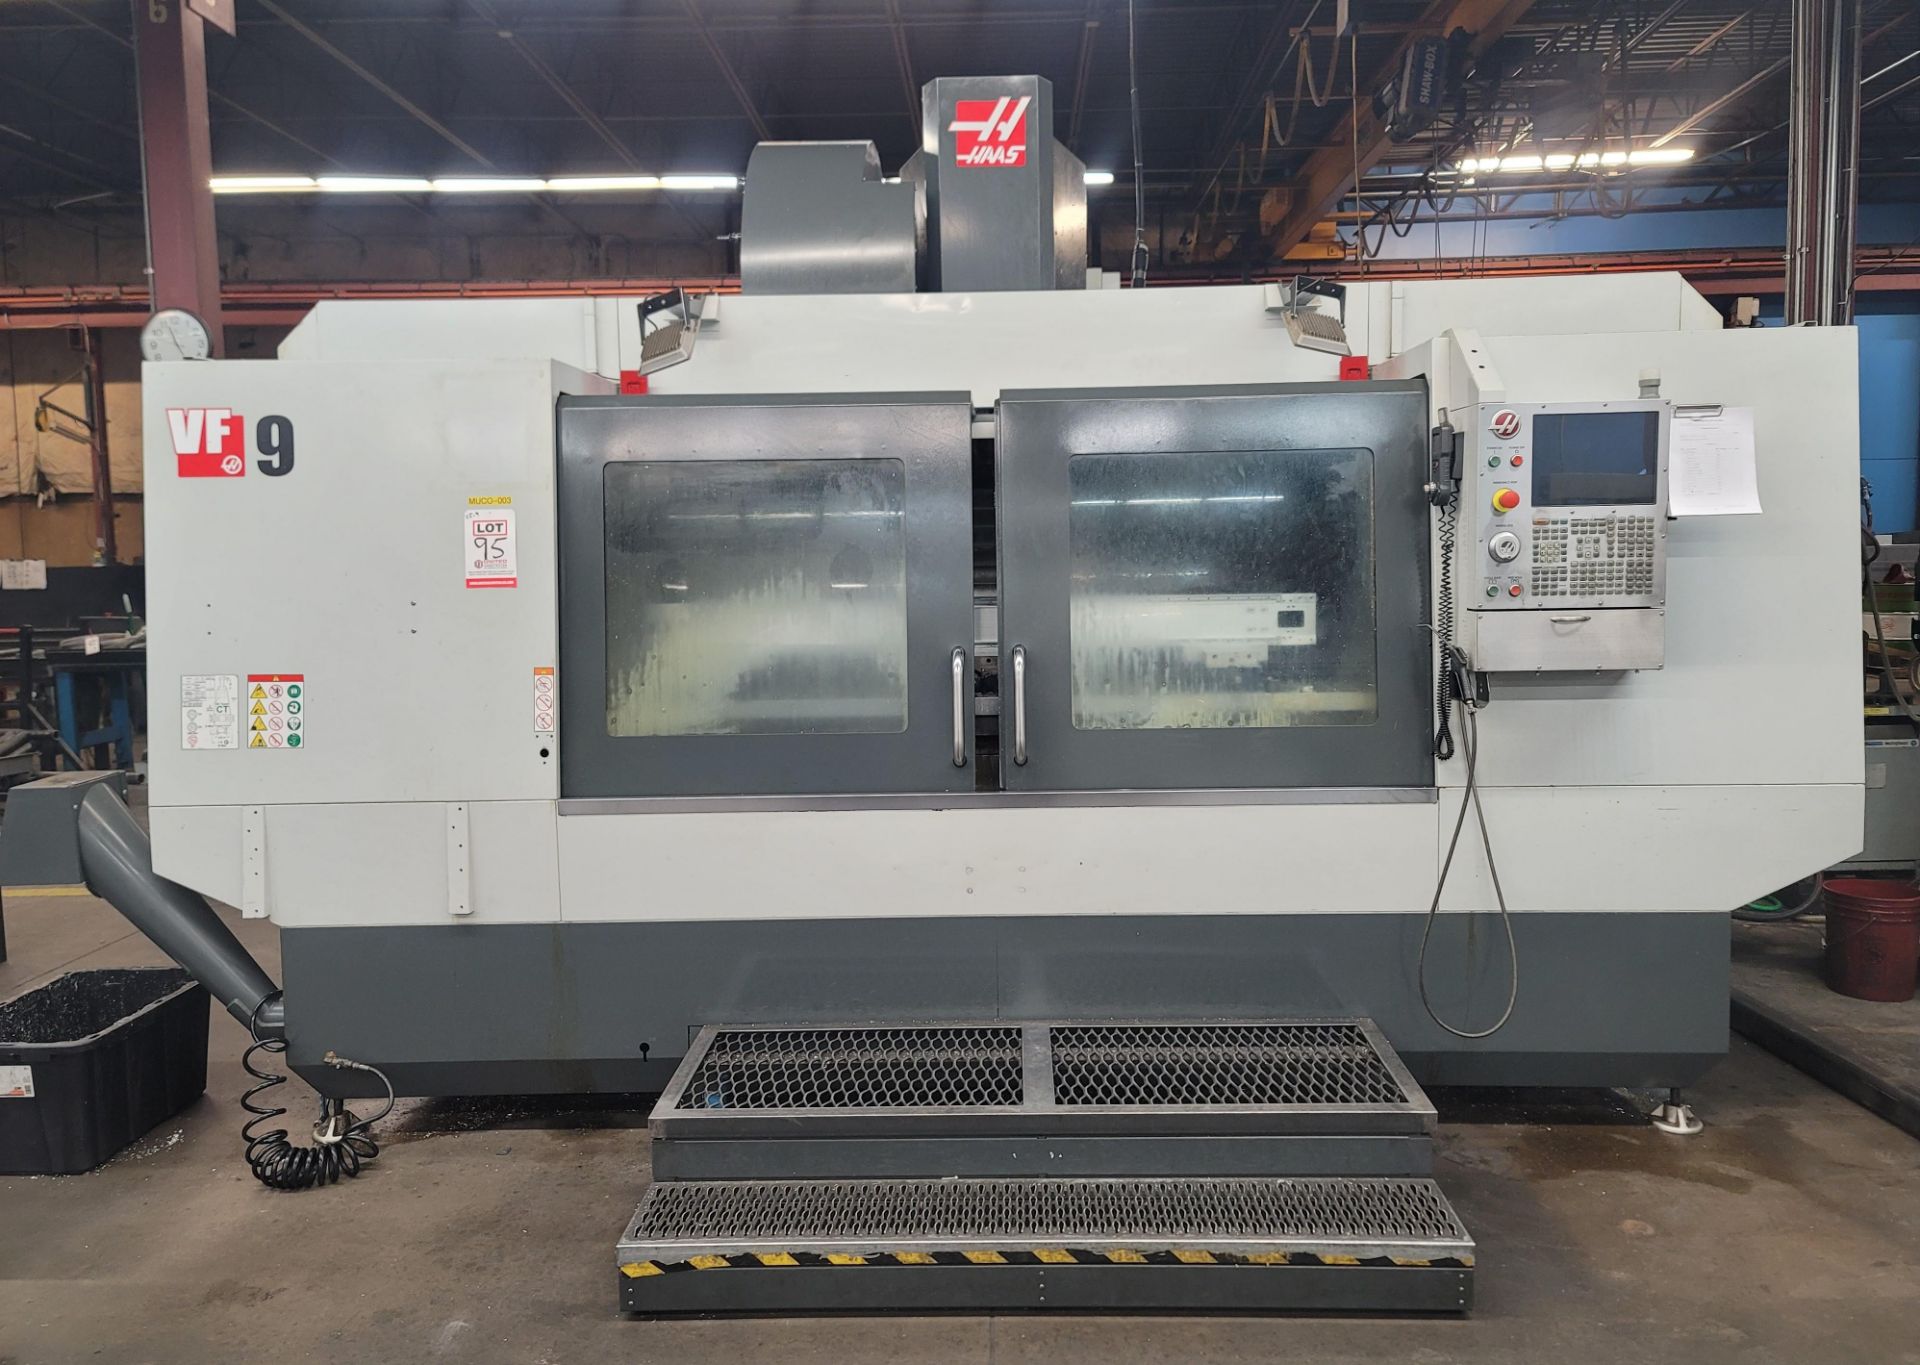 2017 HAAS VF-9/40 VERTICAL MACHINING CENTER, XYZ TRAVELS: 84" X 40" X 30", 84" X 36" TABLE, 8100 RPM - Image 4 of 28